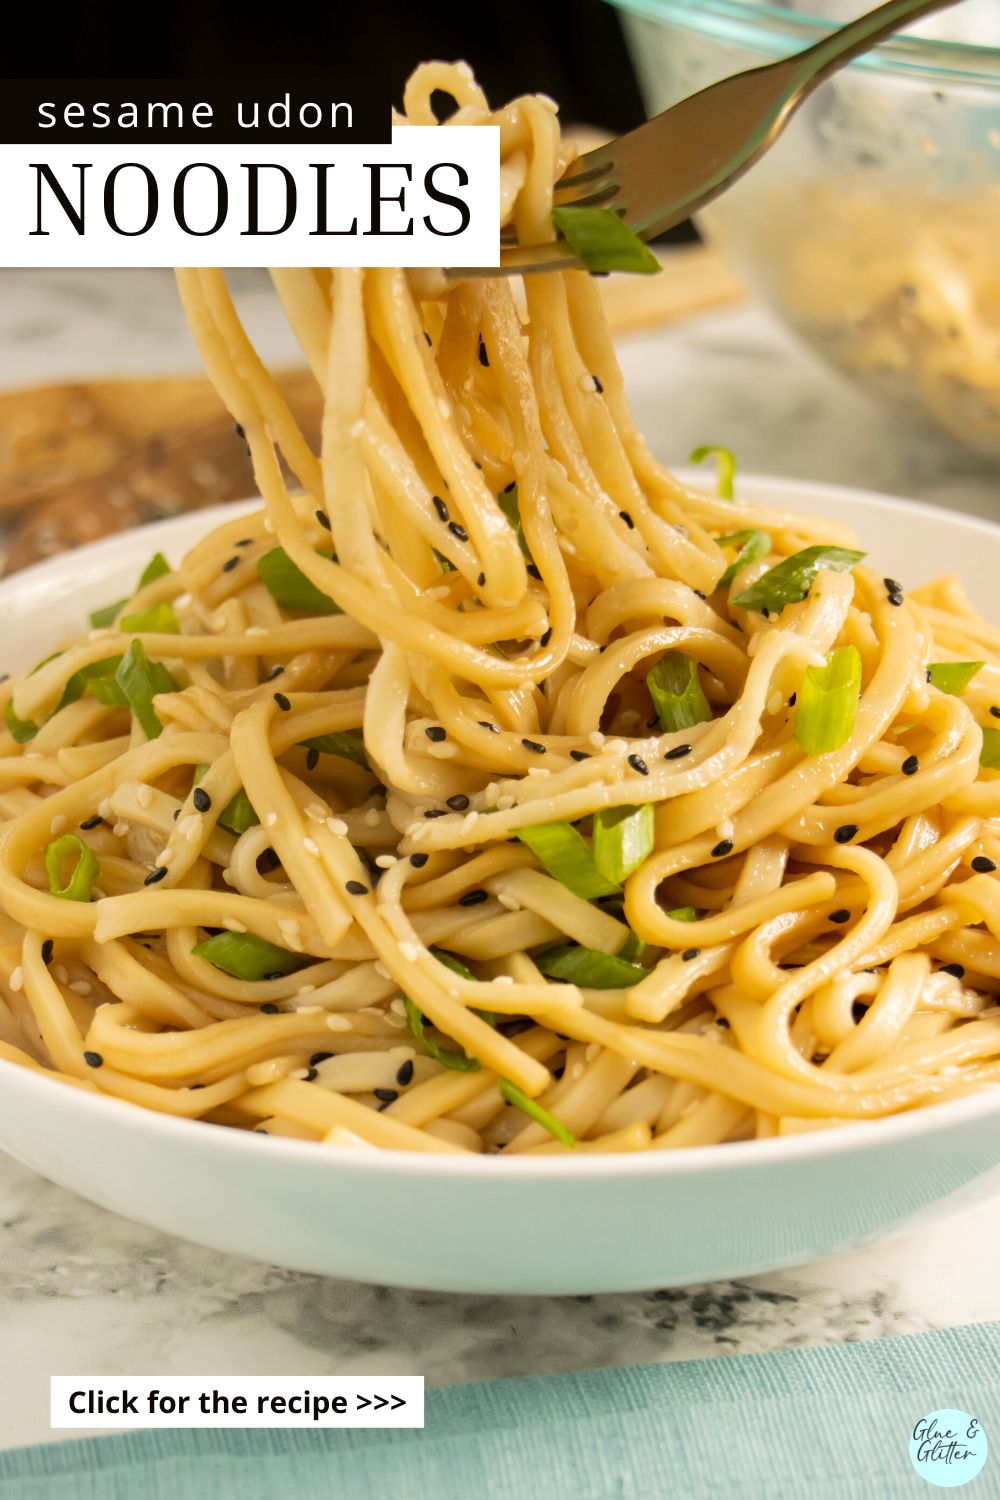 sesame udon noodles in a bowl with green onion, text overlay